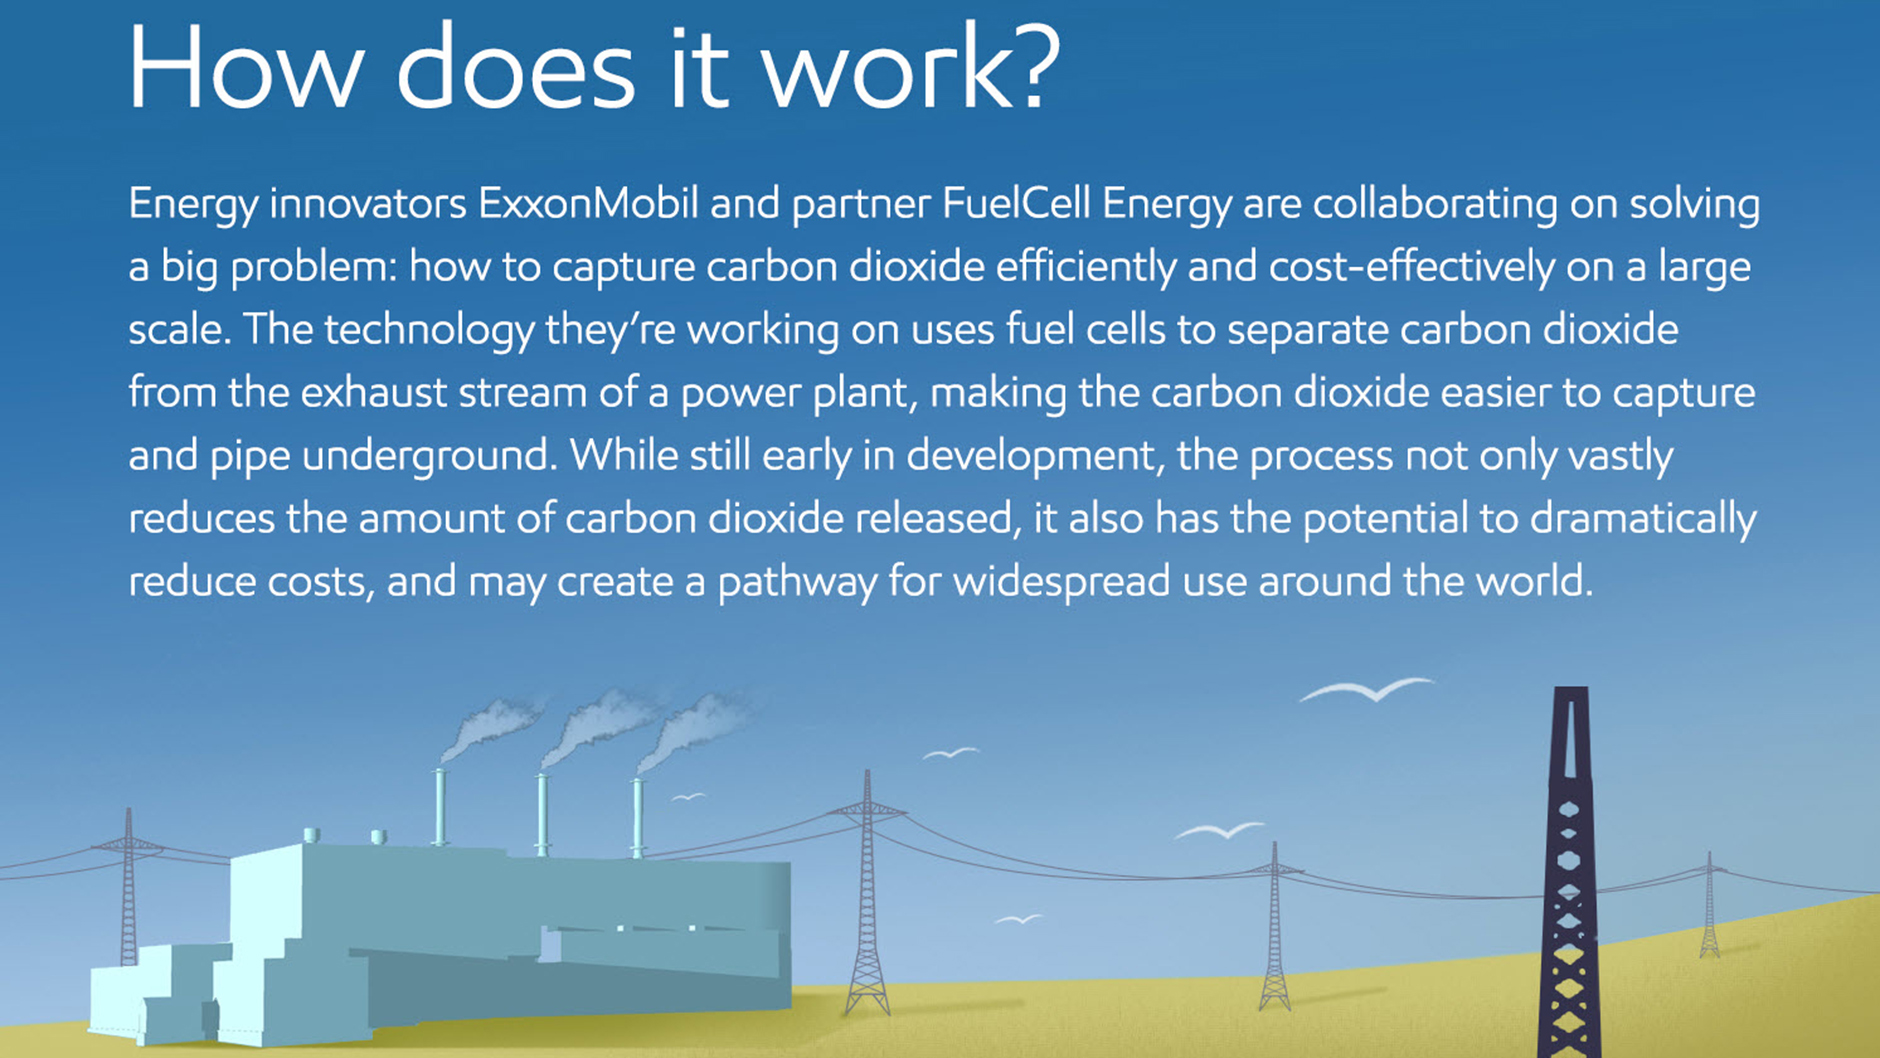 Download our graphic below to learn more about CCS